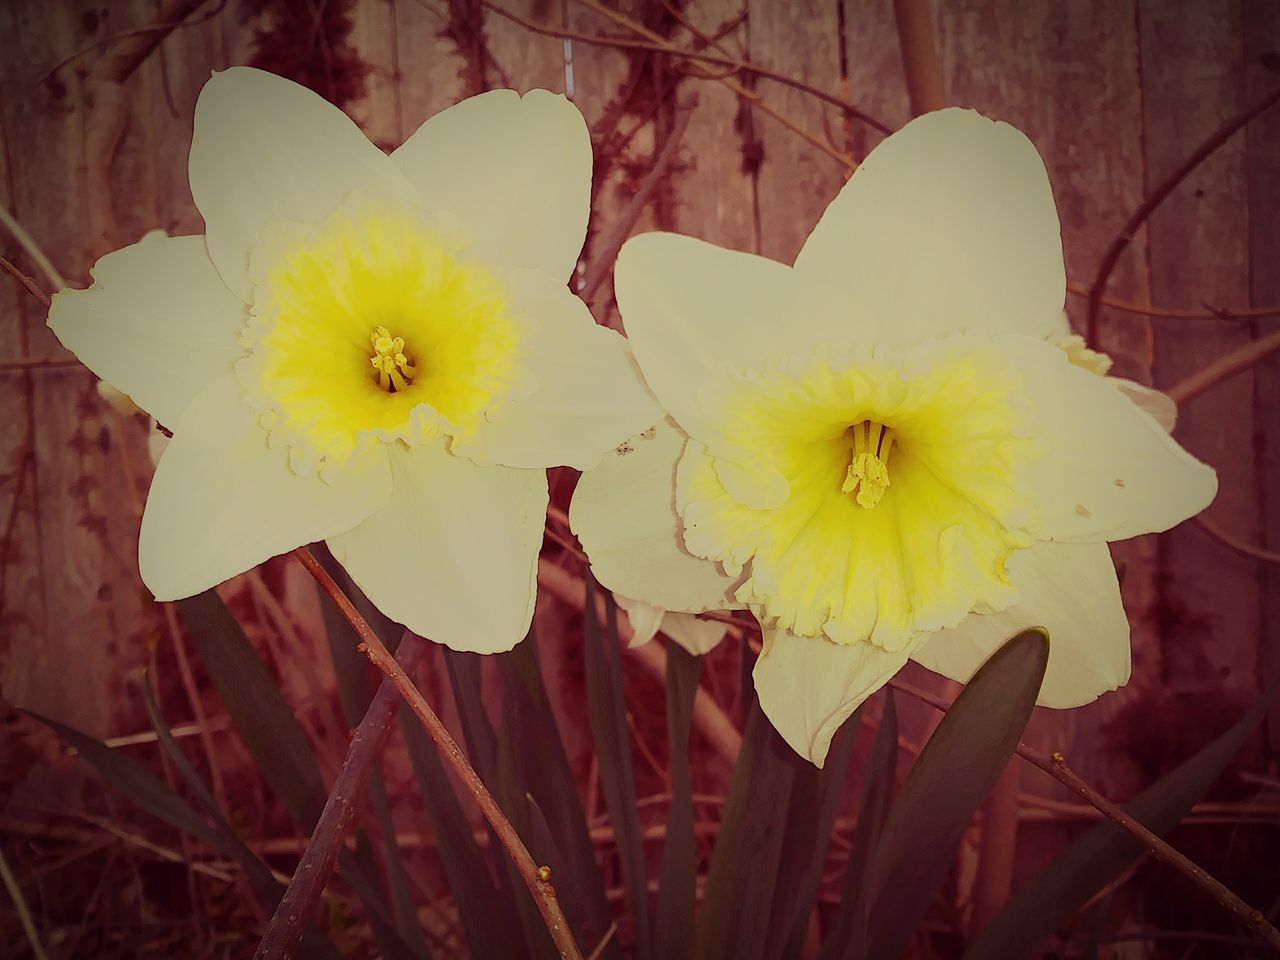 flower, yellow, petal, flower head, nature, beauty in nature, fragility, daffodil, blooming, freshness, plant, spring, outdoors, close-up, growth, no people, day